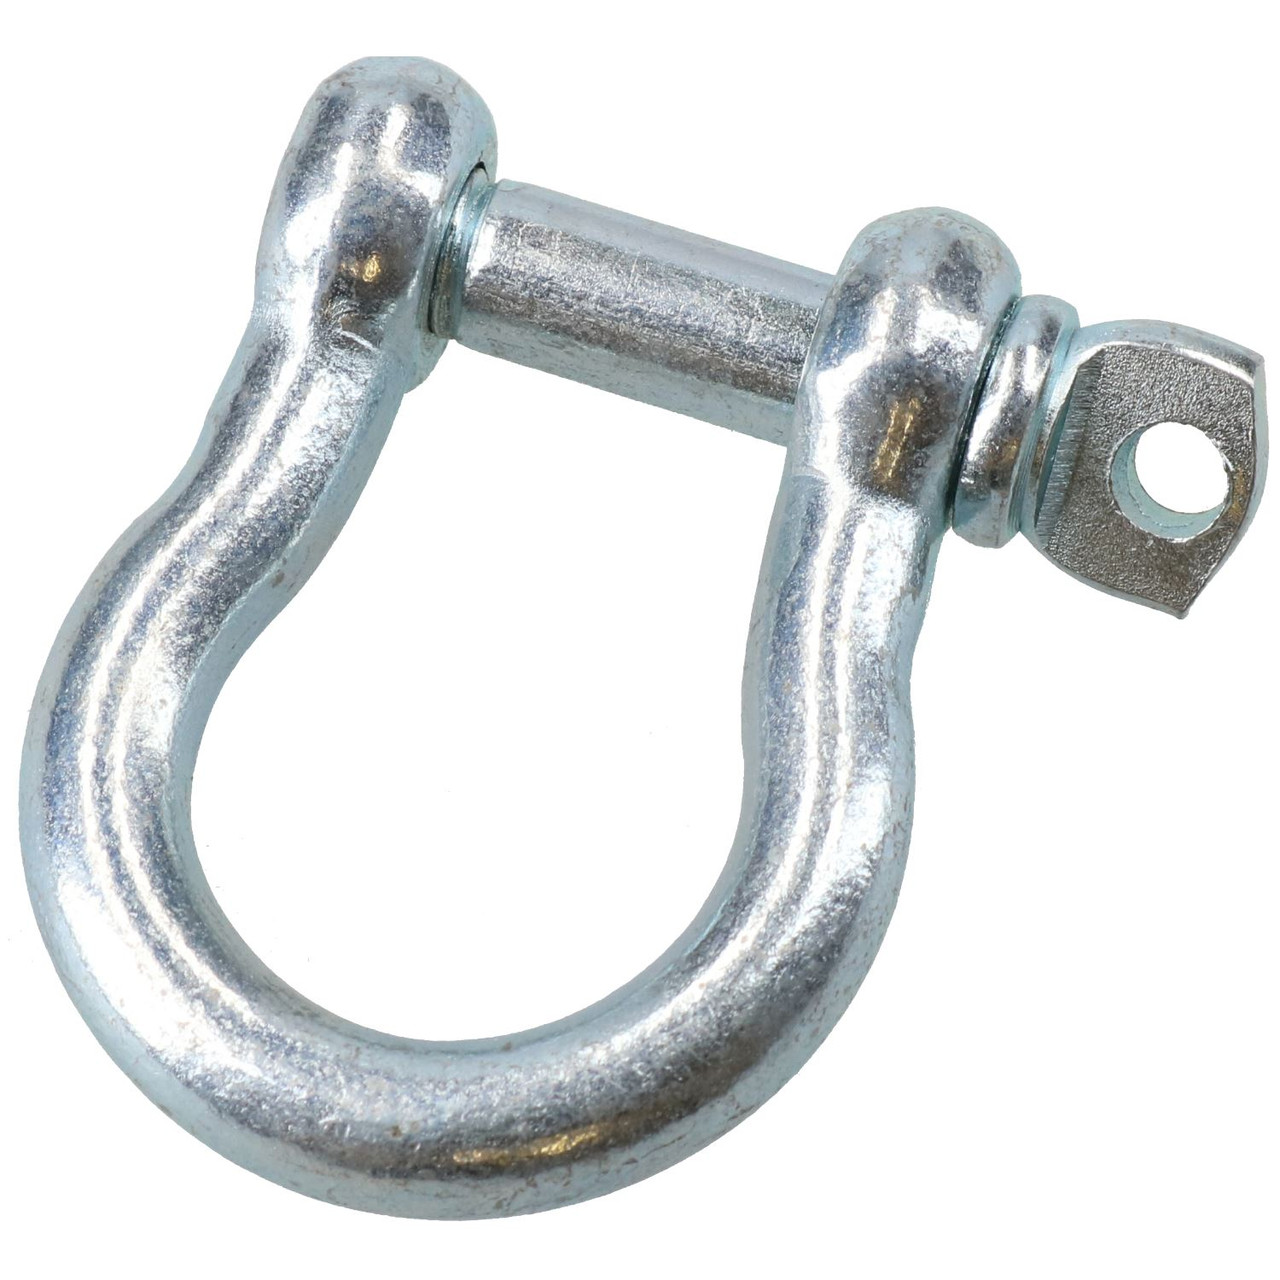 1/2" Stainless Steel Dee Shackle Load Rated SWL 2 Ton Marine Grade 316 DK39 